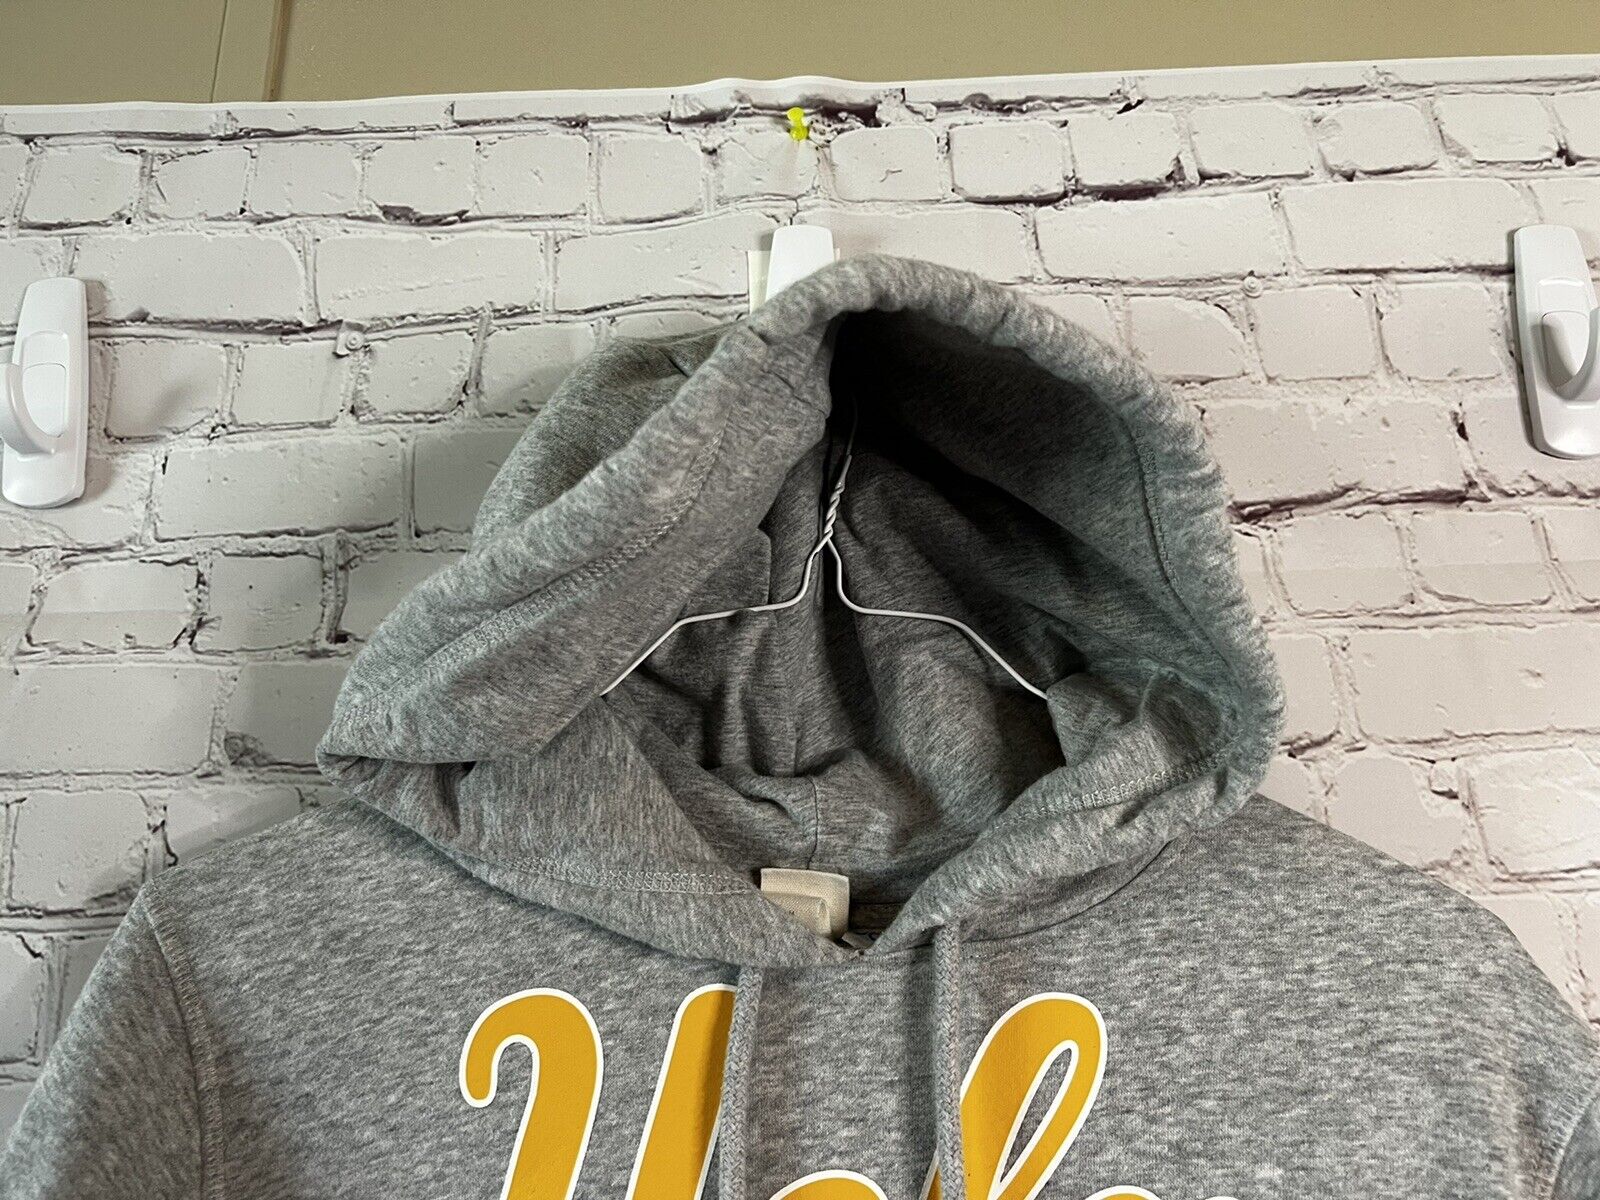 UCLA Bruins Top Of The World Hoodie (Gray) XL , 2XL Mens Brand New for Sale  in Artesia, CA - OfferUp